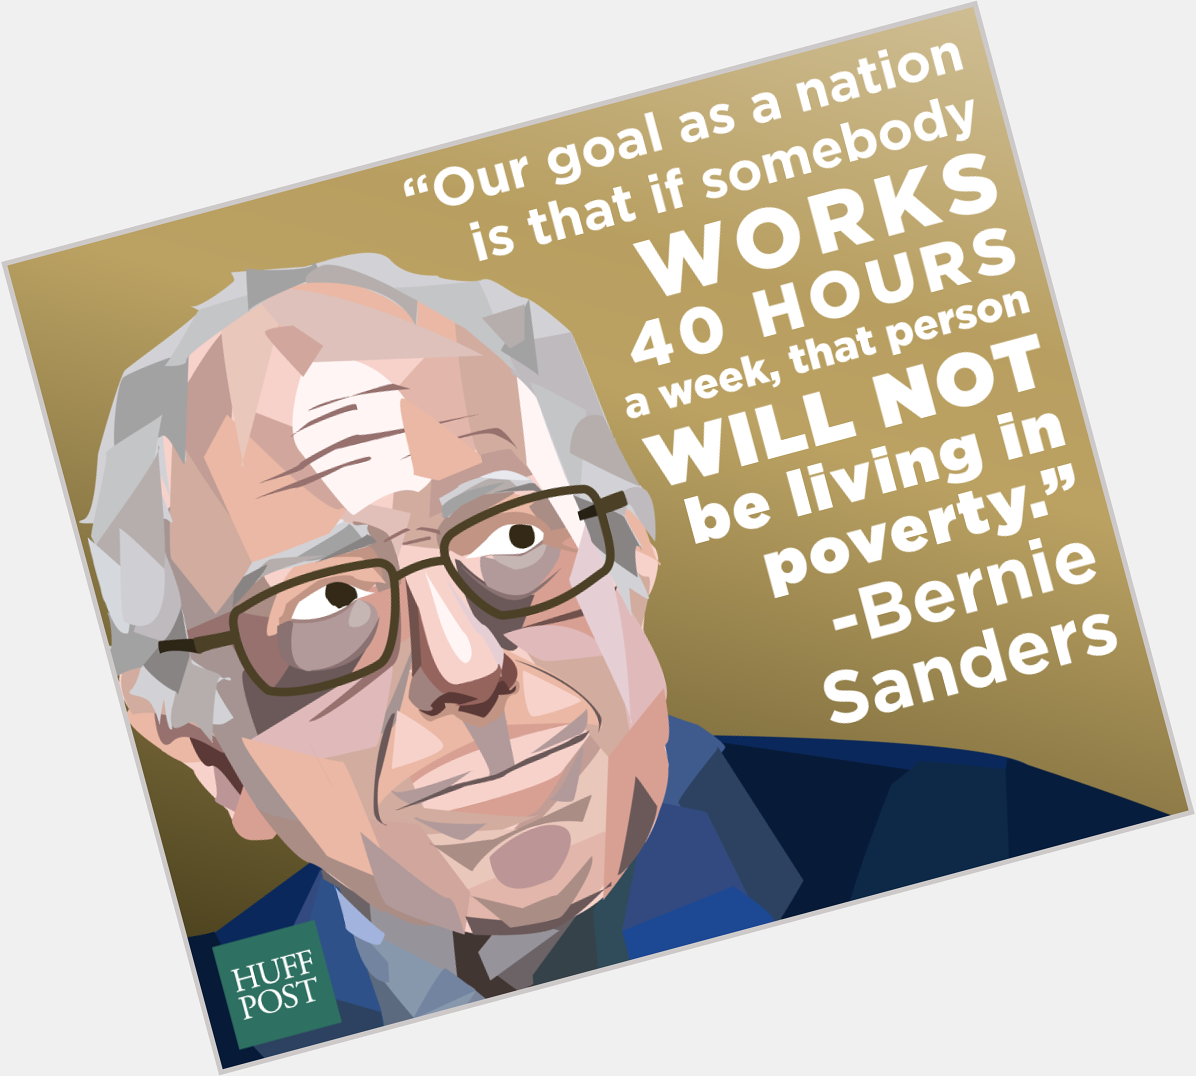   In honor of his birthday, here\s some real talk from Bernie Sanders   happy bday